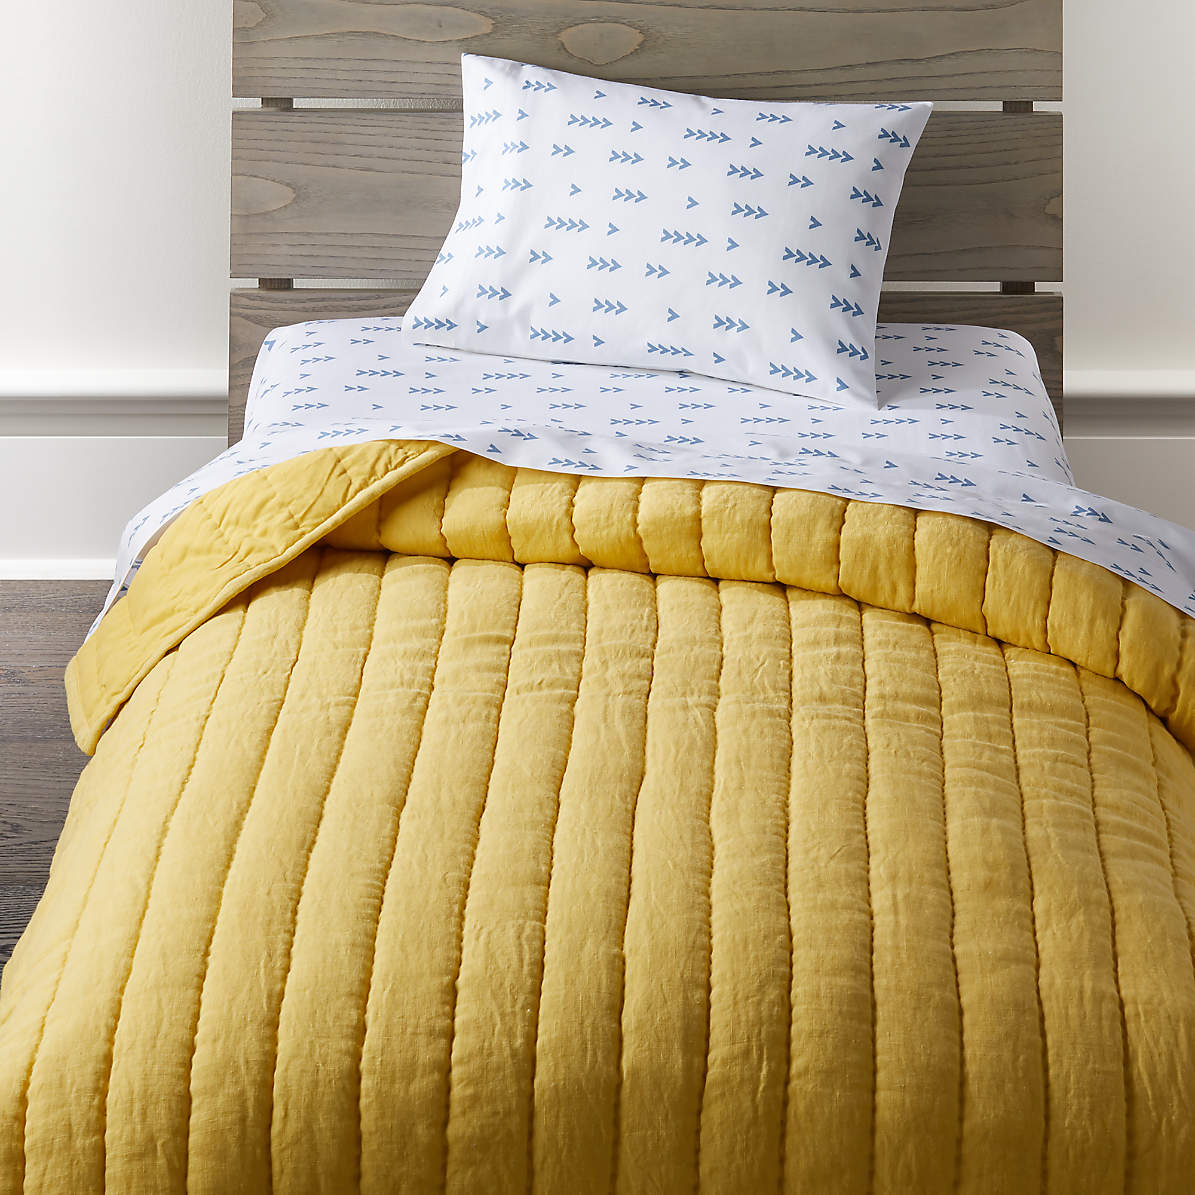 yellow cot bed duvet cover